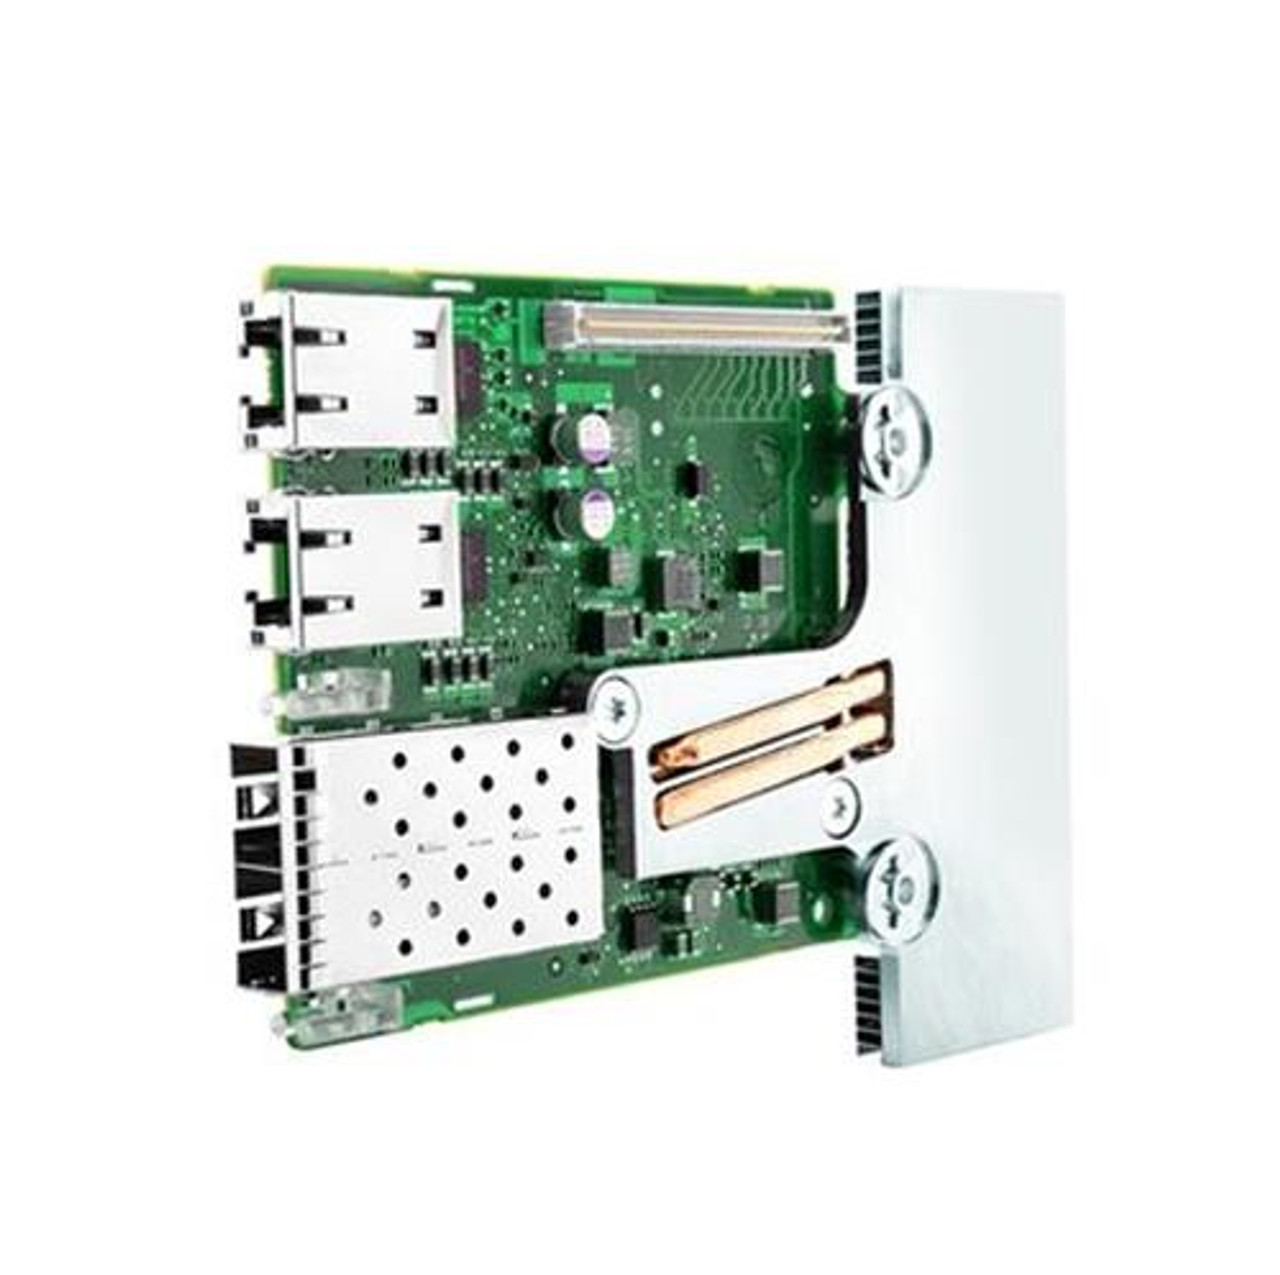 540-BBBY Dell 57800s Quad-Port SFP+ Network Adapter